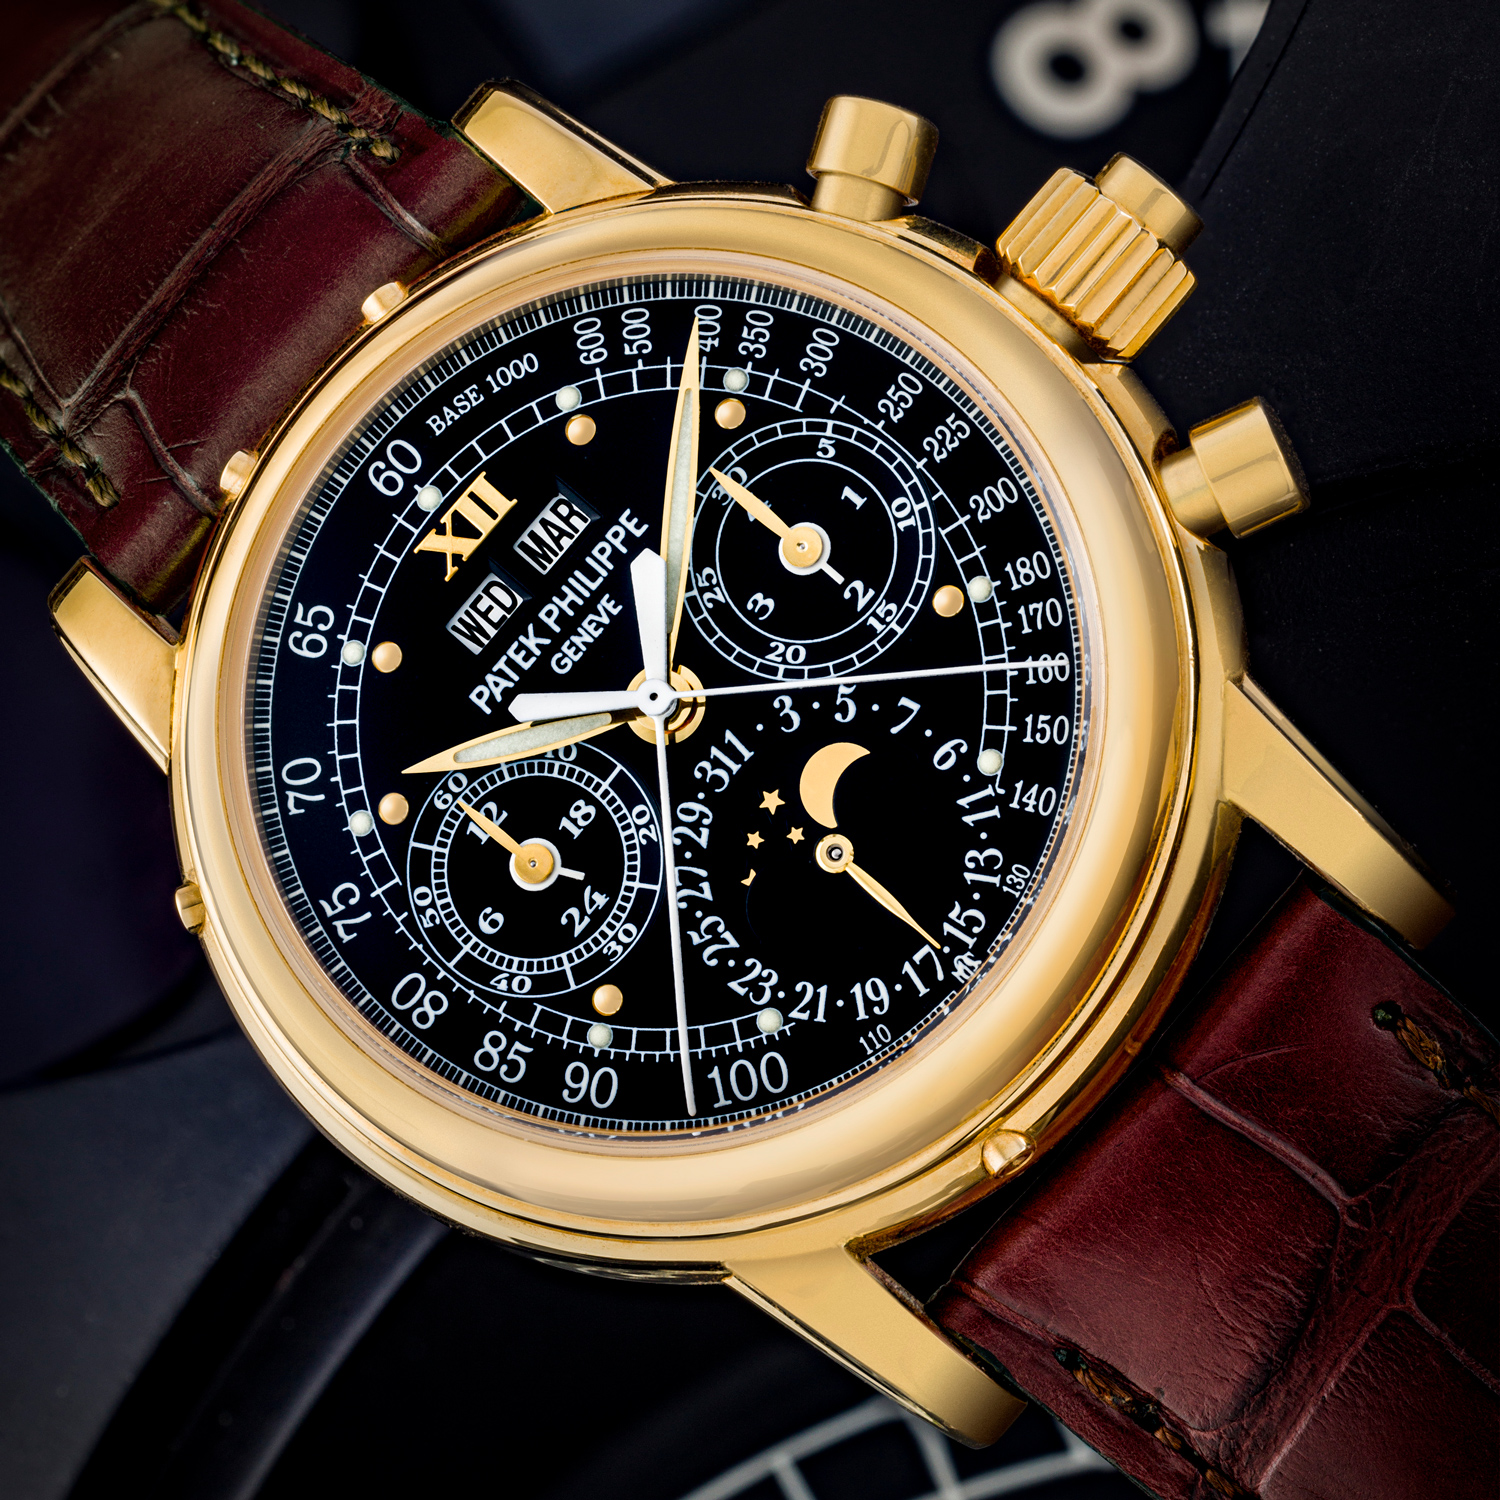 Lot 2520: Patek Phliippe 18k Gold Manual Winding Split Seconds Chronograph Wristwatch with Moon Phases, 24 Hour, Leap Year Indication And Black Monogram Dial With Luminous Hour Markers And Tachymeter Scale, Circa 2011